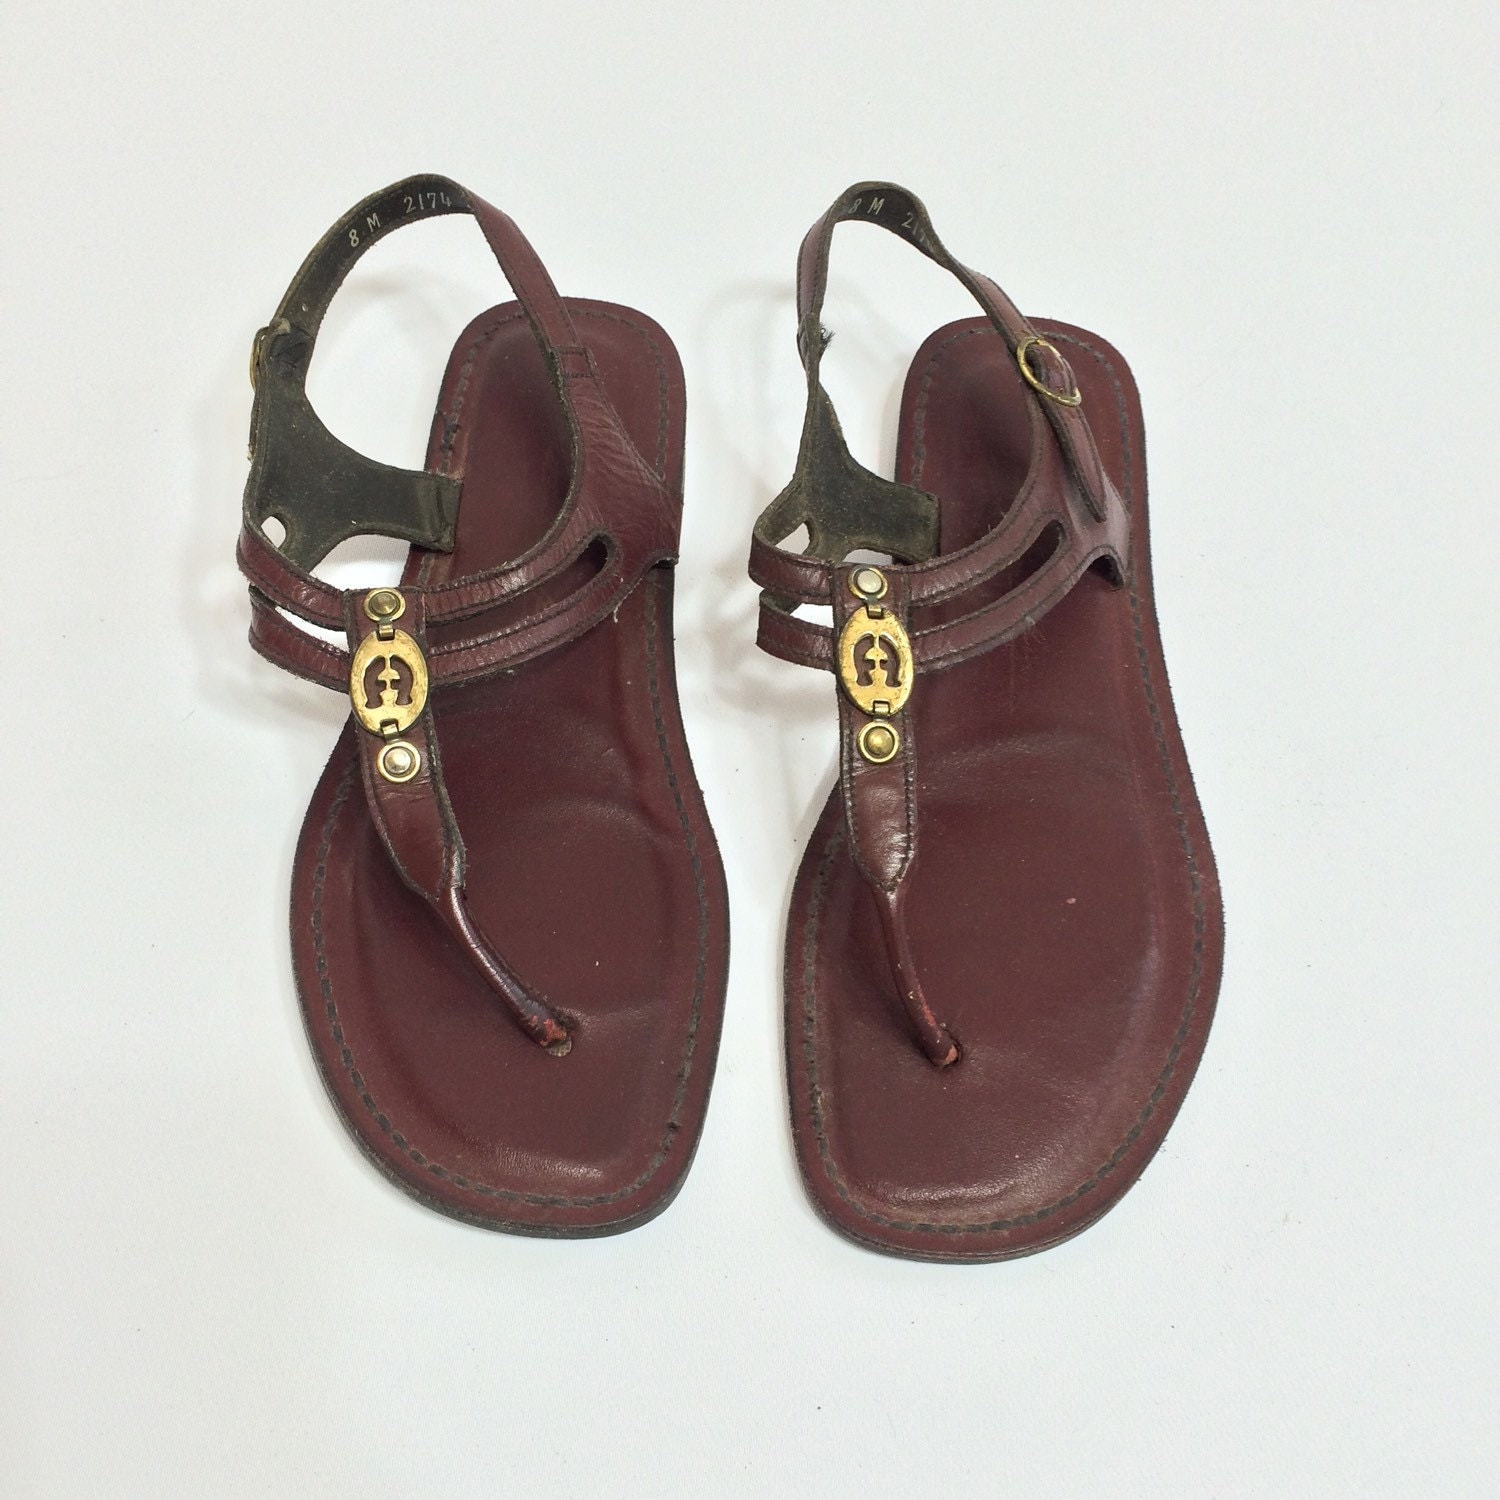  70s  Leather  Thong  Strap Sandals  size 8 Etienne Aigner Low Heel